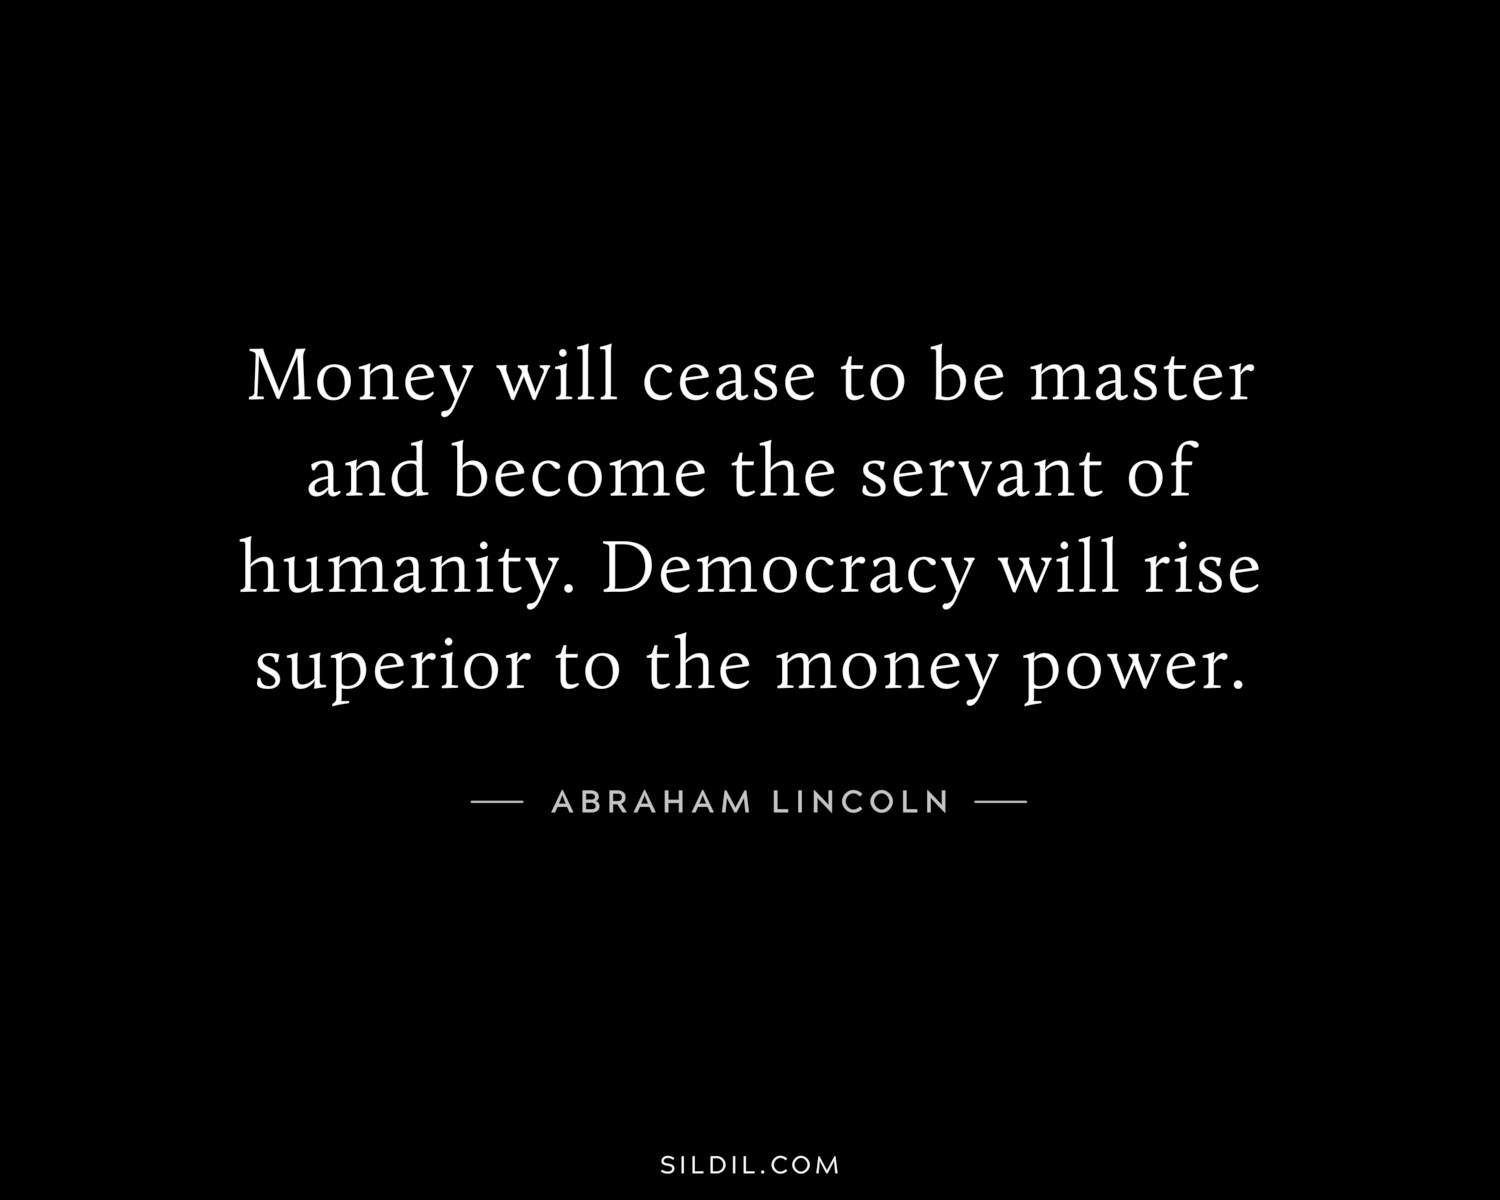 Money will cease to be master and become the servant of humanity. Democracy will rise superior to the money power.